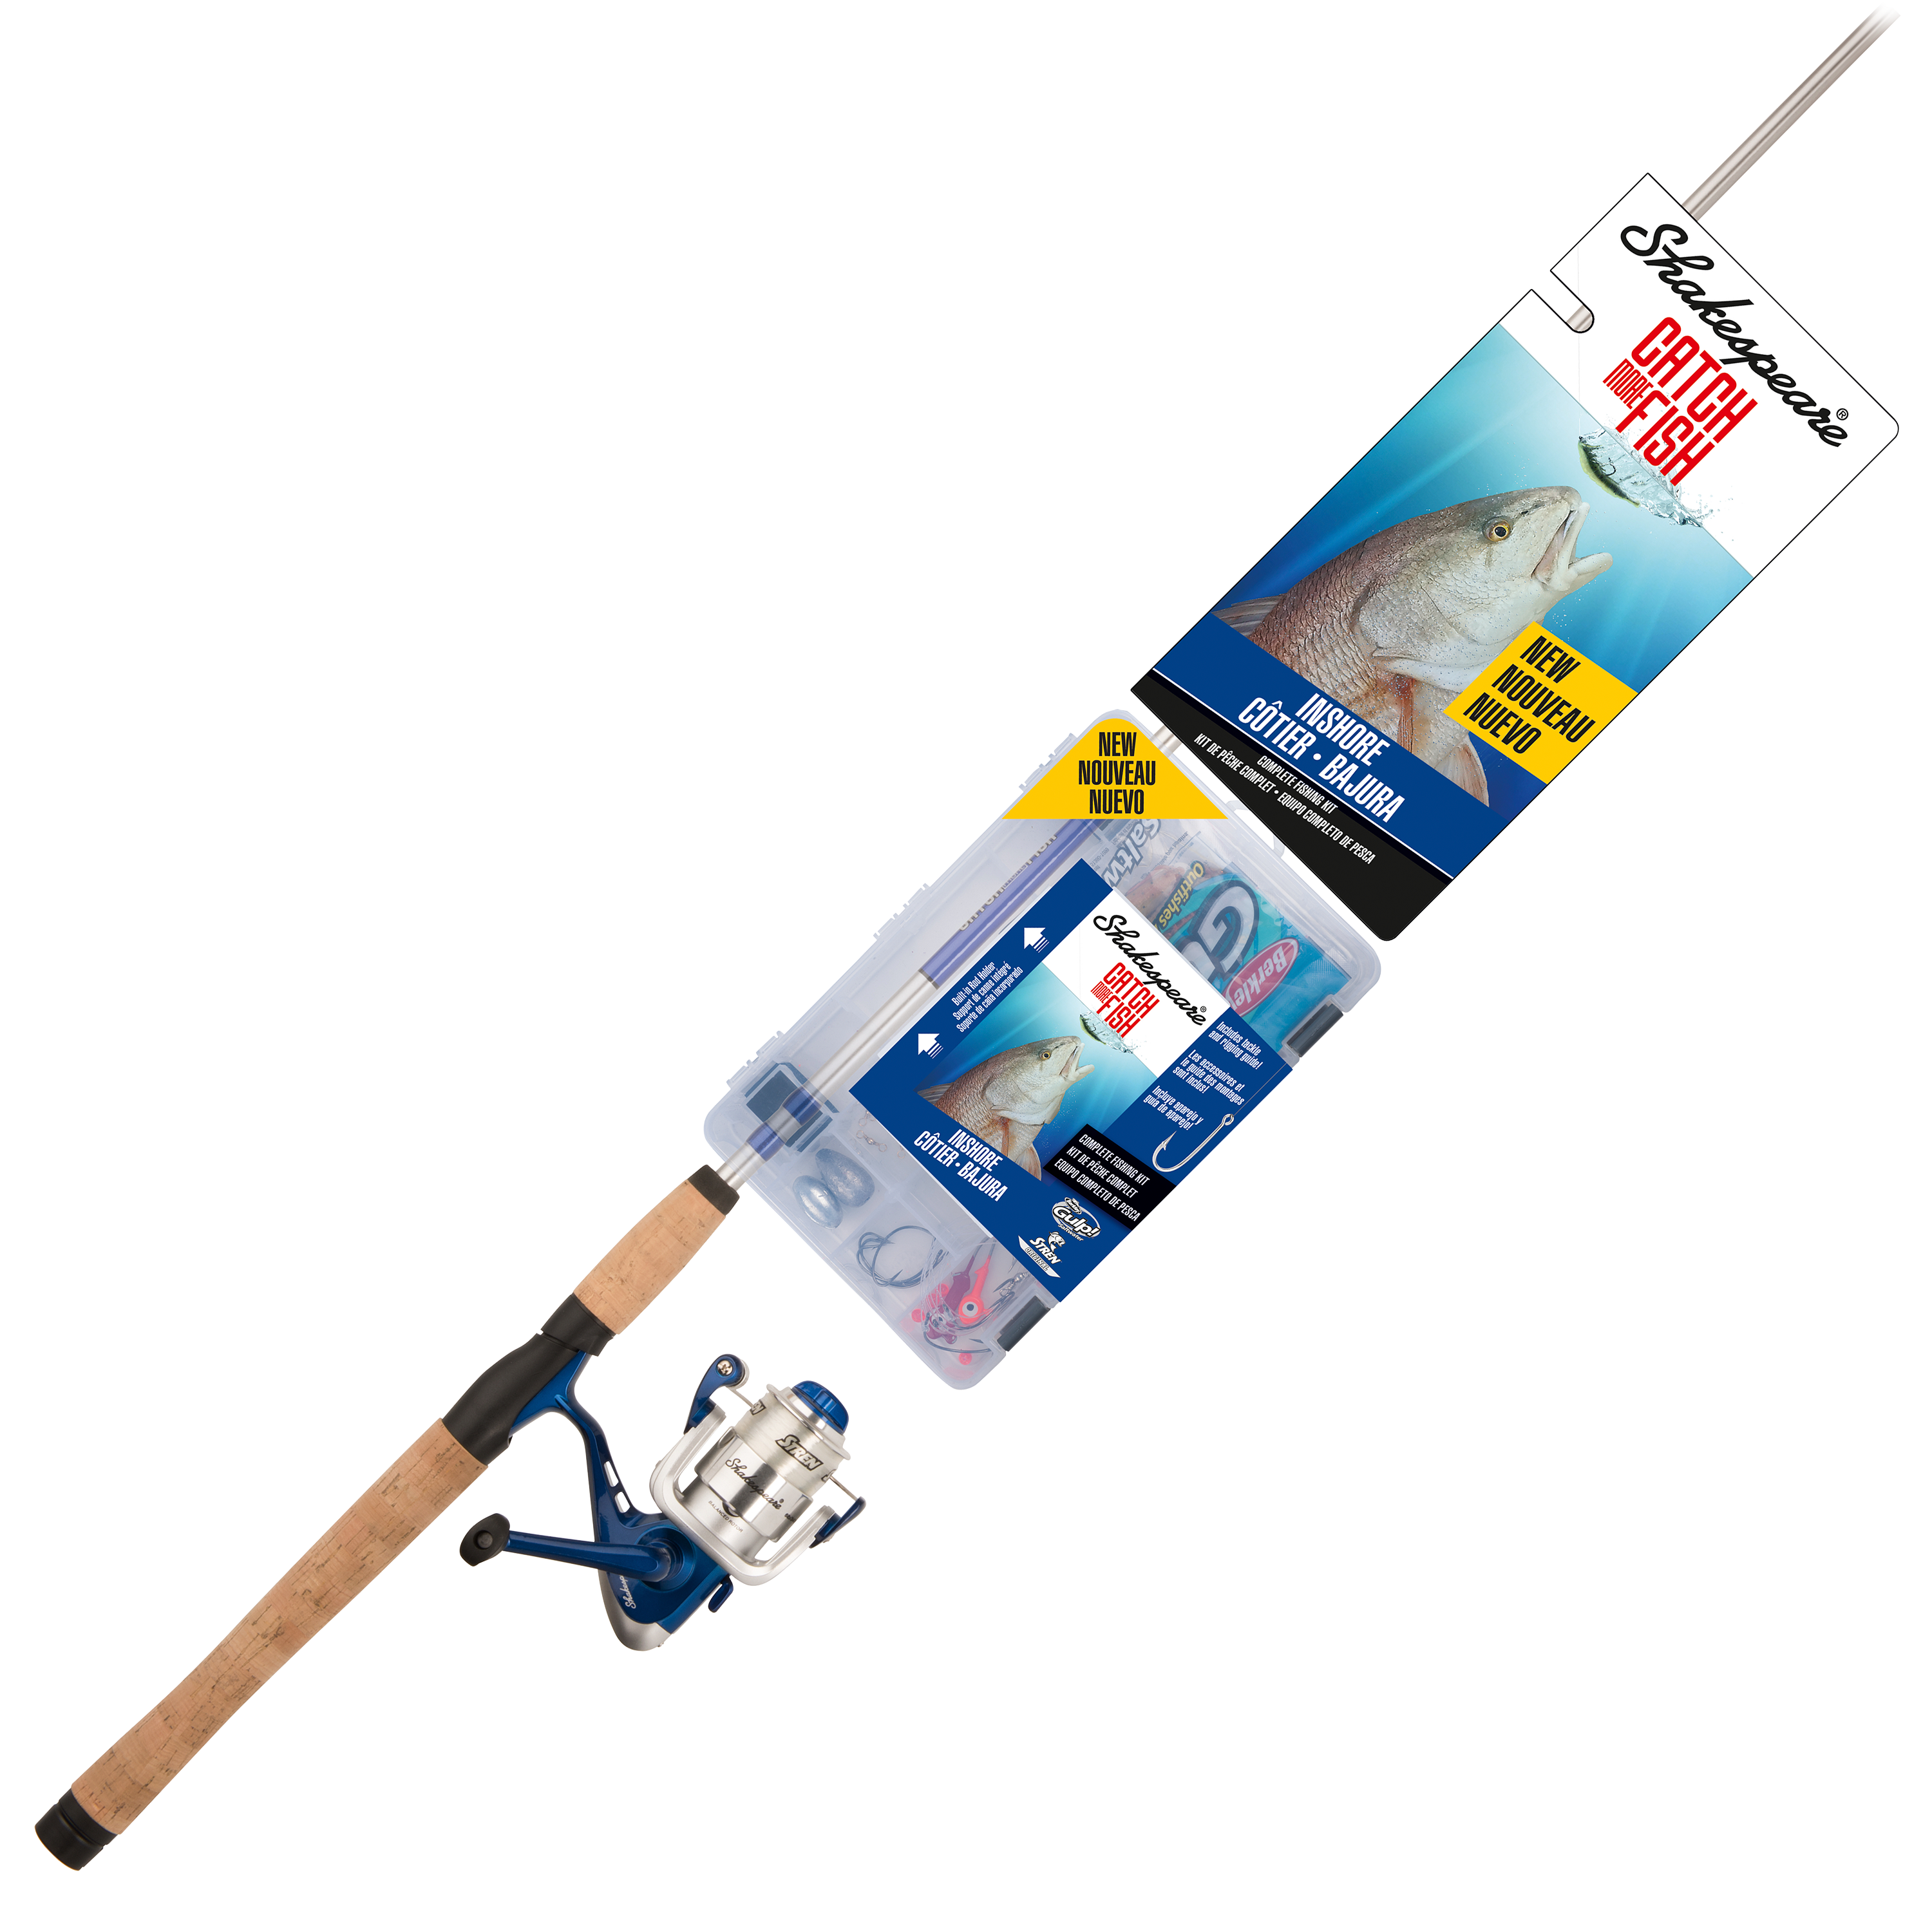 Shakespeare Catch More Fish Inshore Spinning Rod and Reel Combo - Model CMF2INSHORE